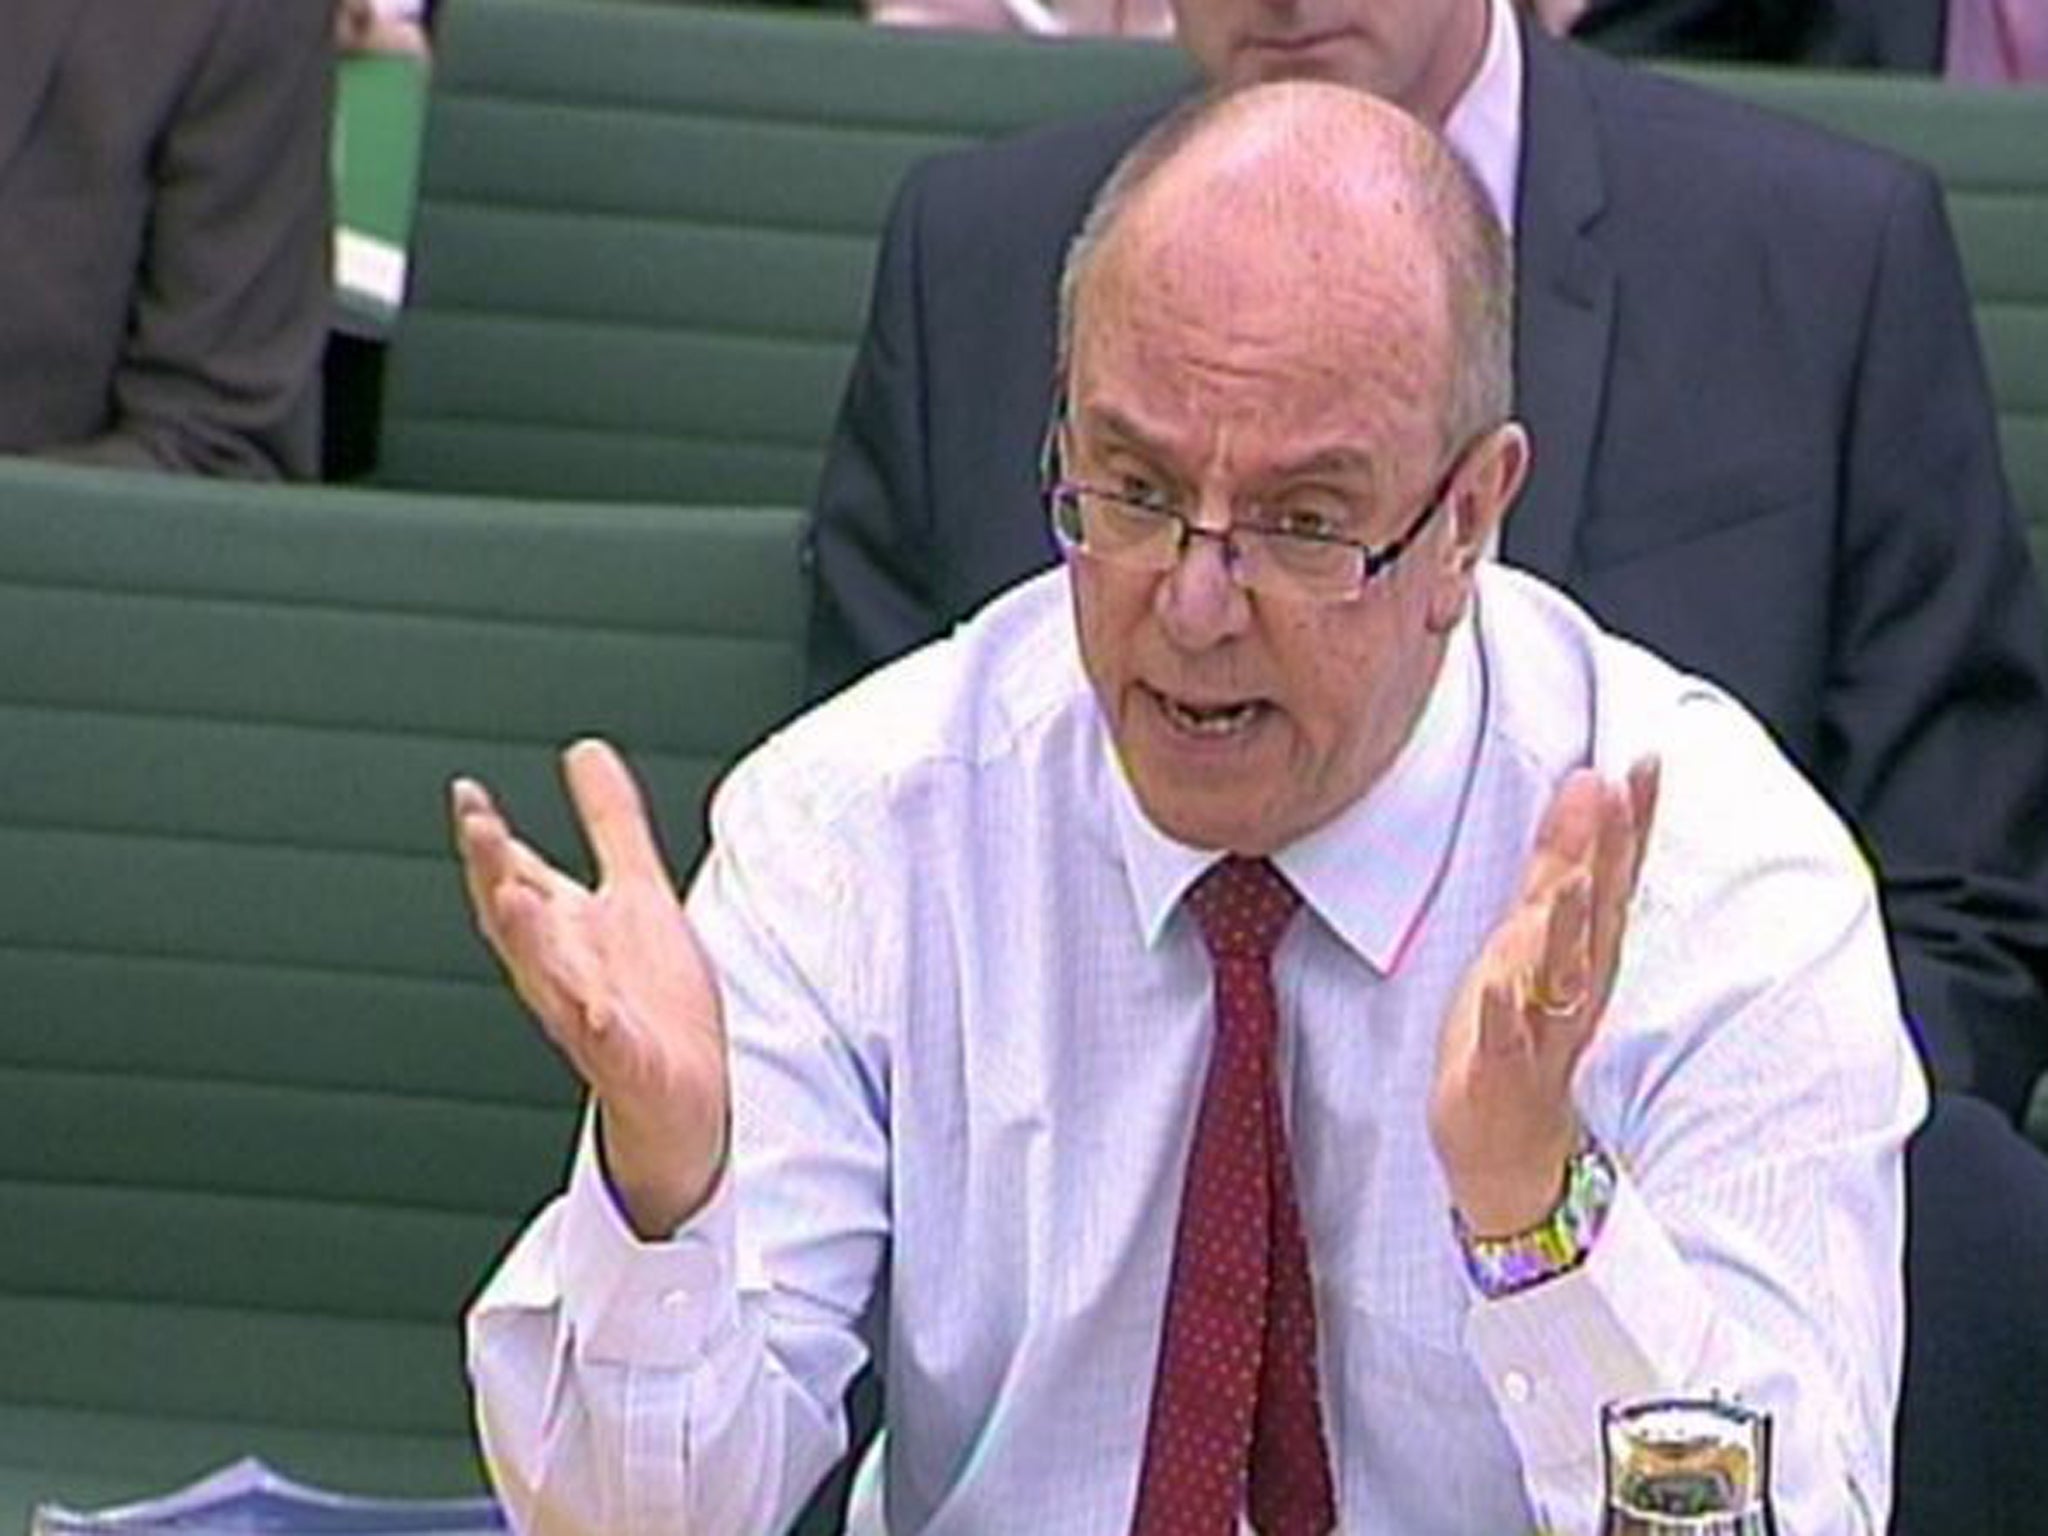 Sir David Nicholson, who has been facing calls for his resignation over the scandal, told the Health Select Committee that he was deeply, deeply saddened by reading the stories of patients who had been mistreated